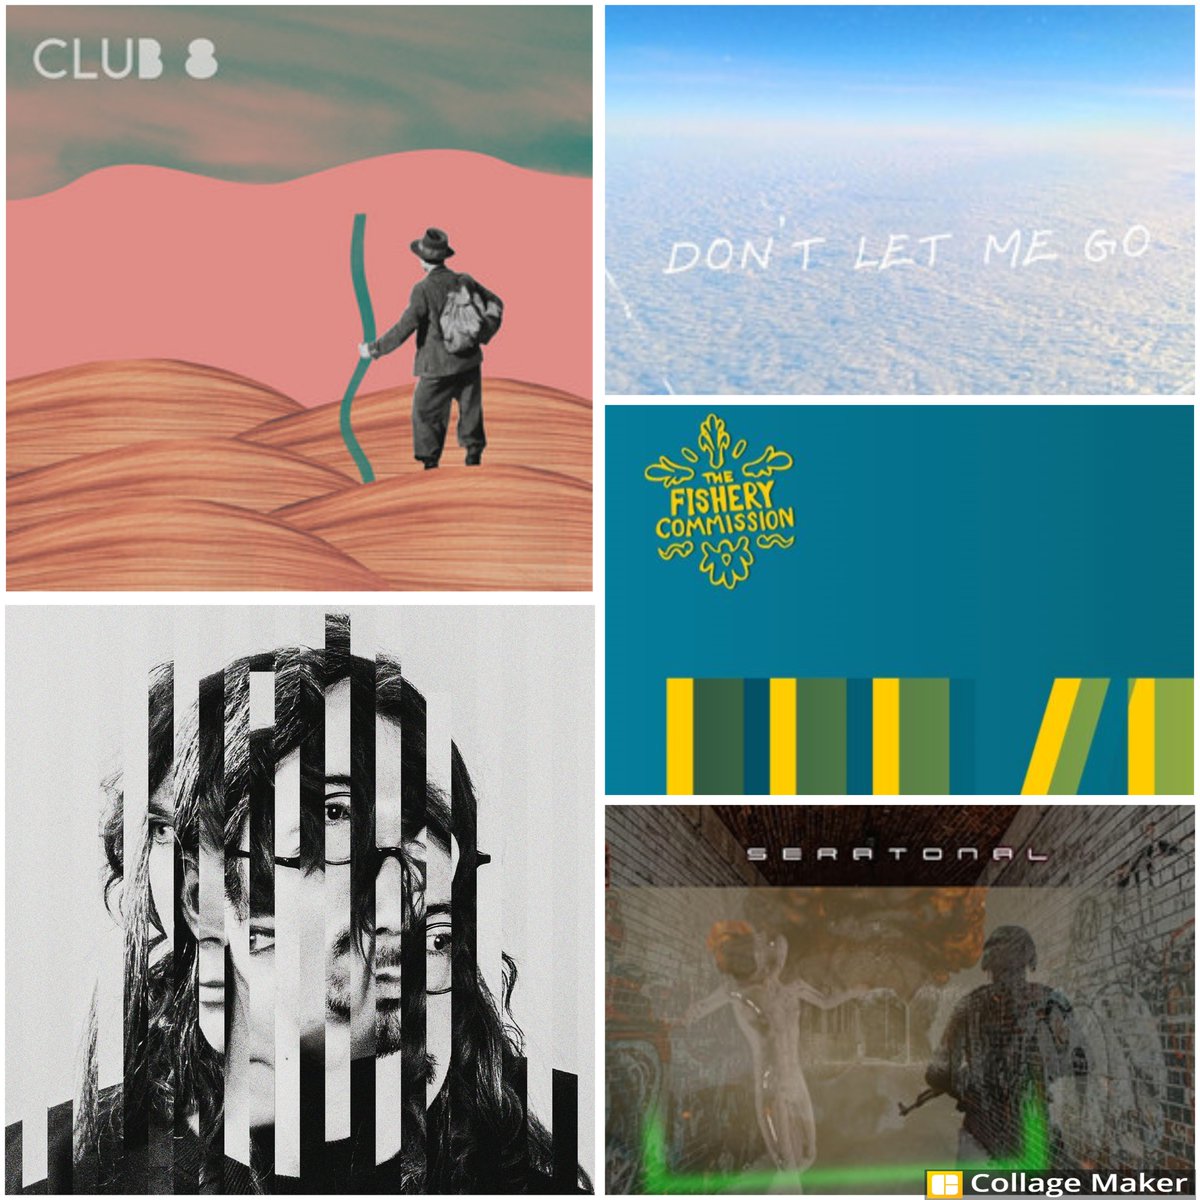 New Week, New Music! Don't miss out on the new singles from Club 8 (#club8), Holding Hour (@HoldingHour), April Skies (#aprilskies), Seratonal (#seratonal) and The Fishery Commission (#thefisherycommission) by tapping the link in out bio!